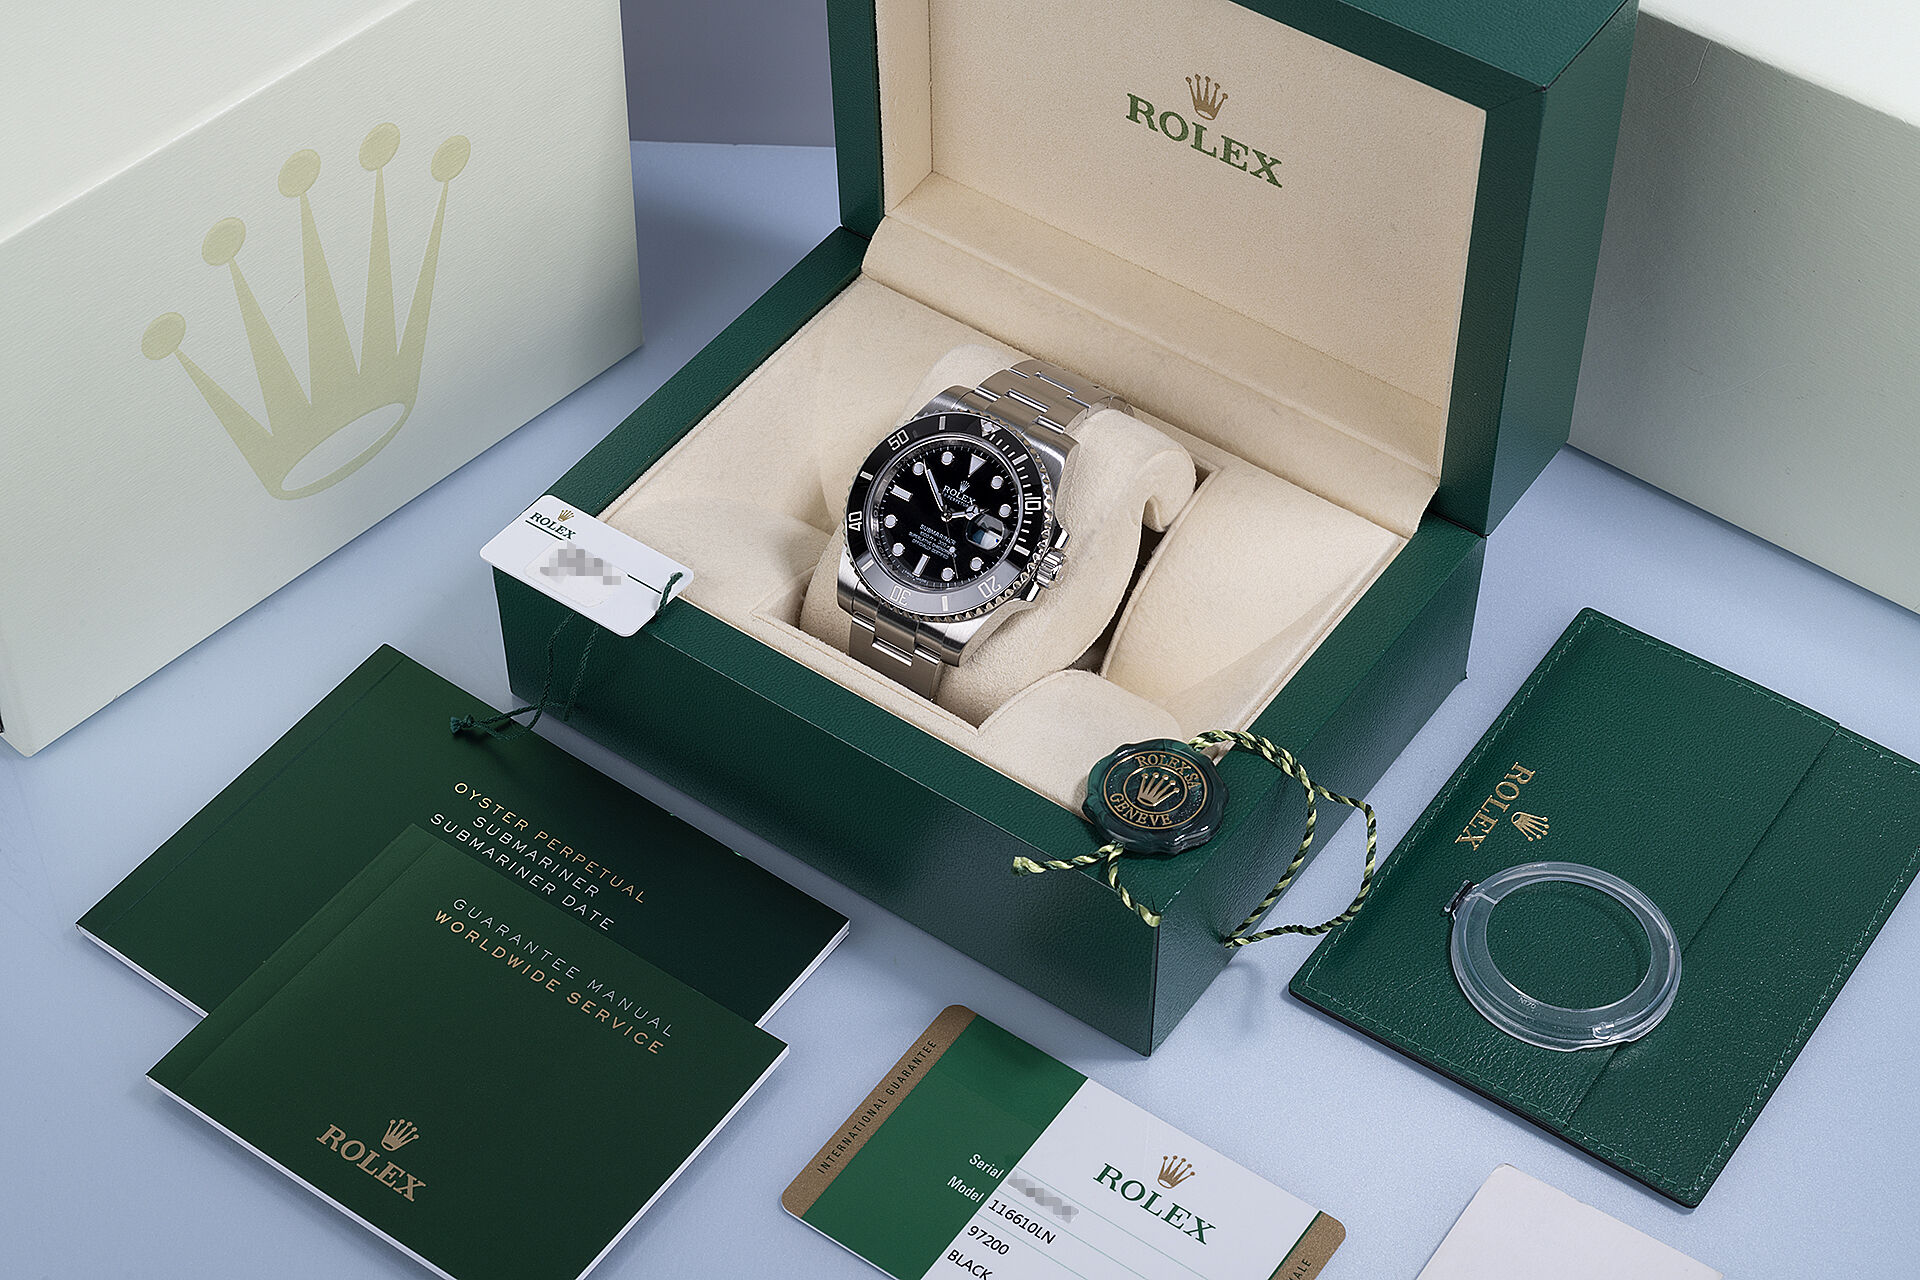 ref 116610LN | No Longer In Production | Rolex Submariner Date